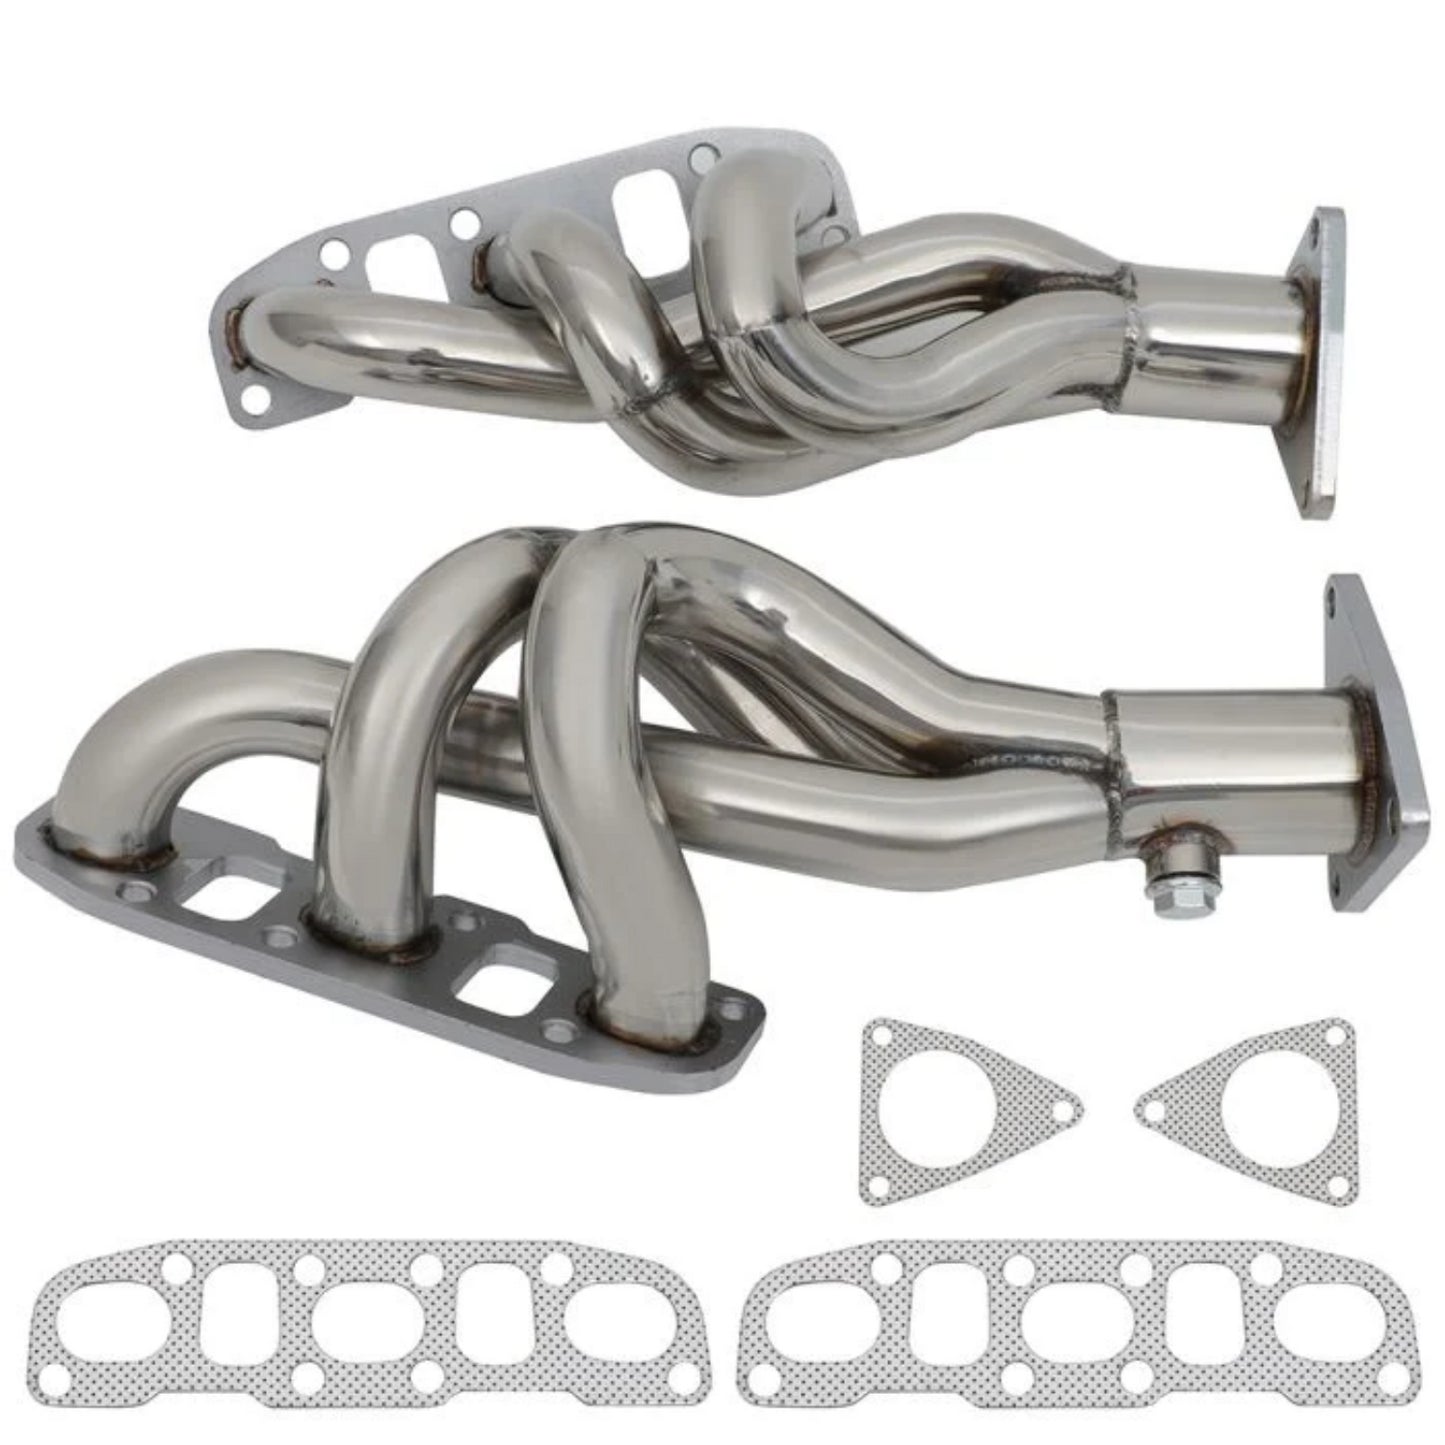 Exhaust Manifold Headers Fits Nissan 370Z 2009-2013 For Infiniti G37 2008-2013 3.7L